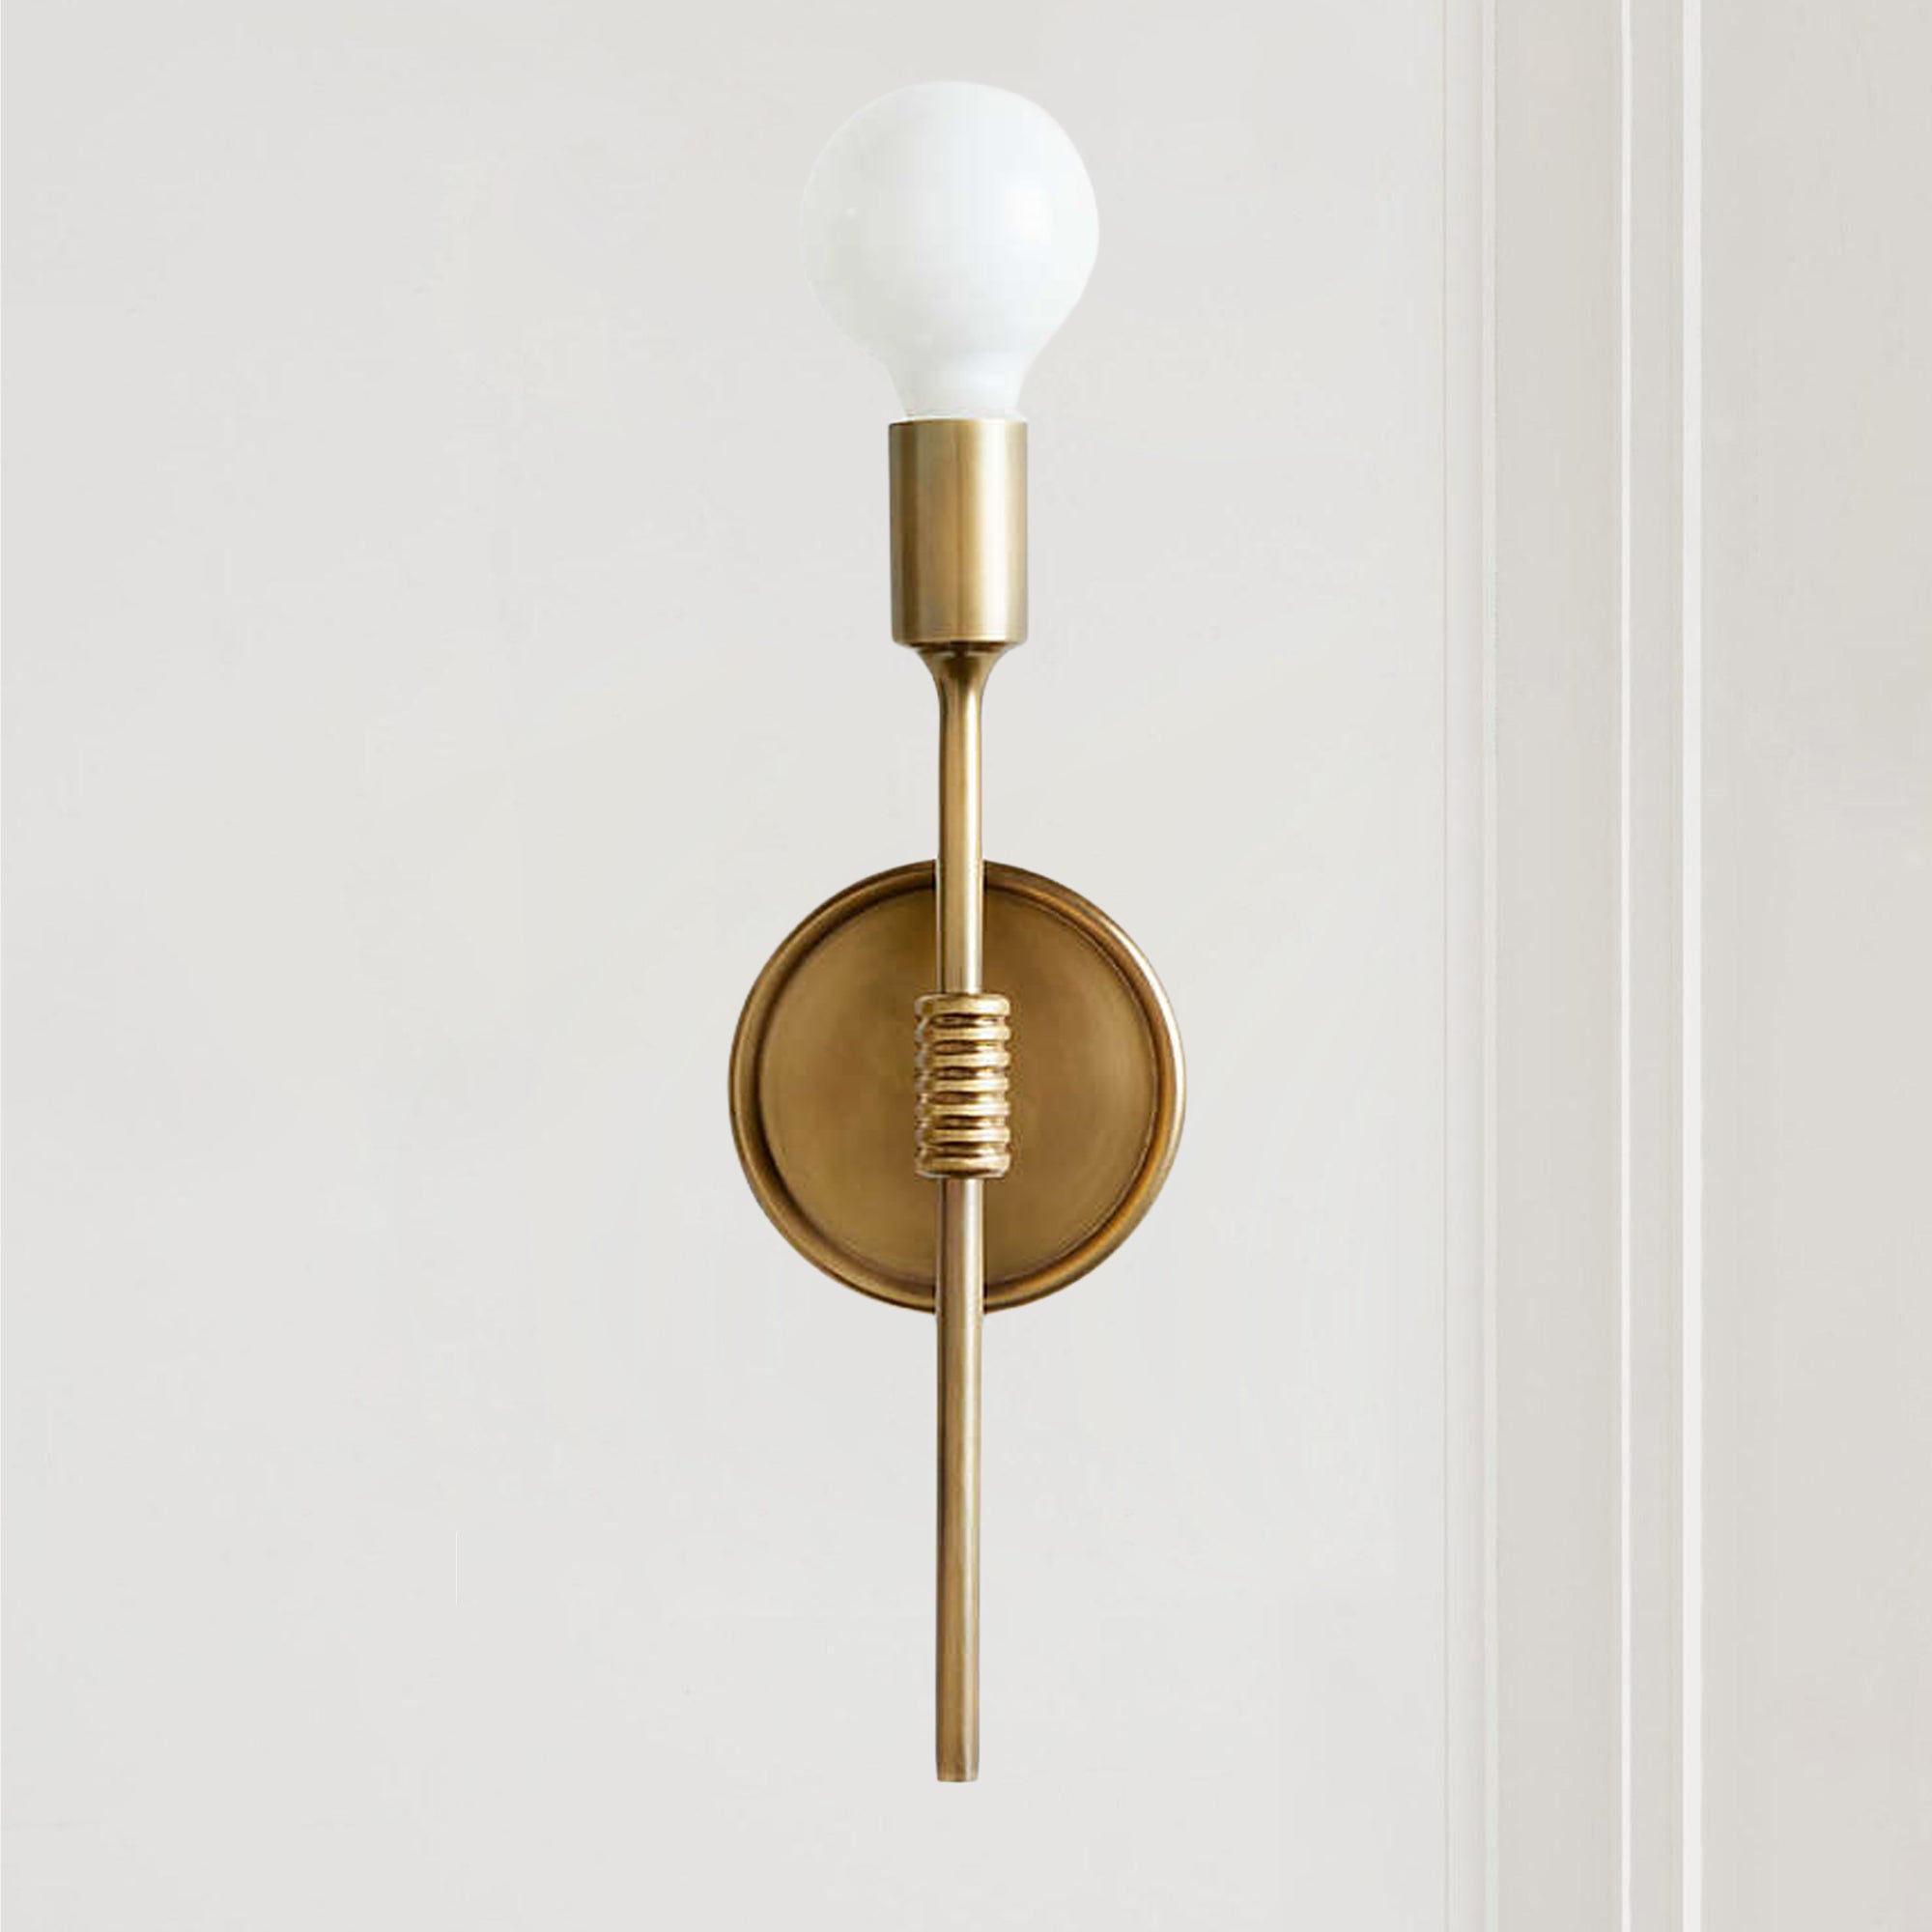 Griffin Burnished Brass Wall Sconce Light